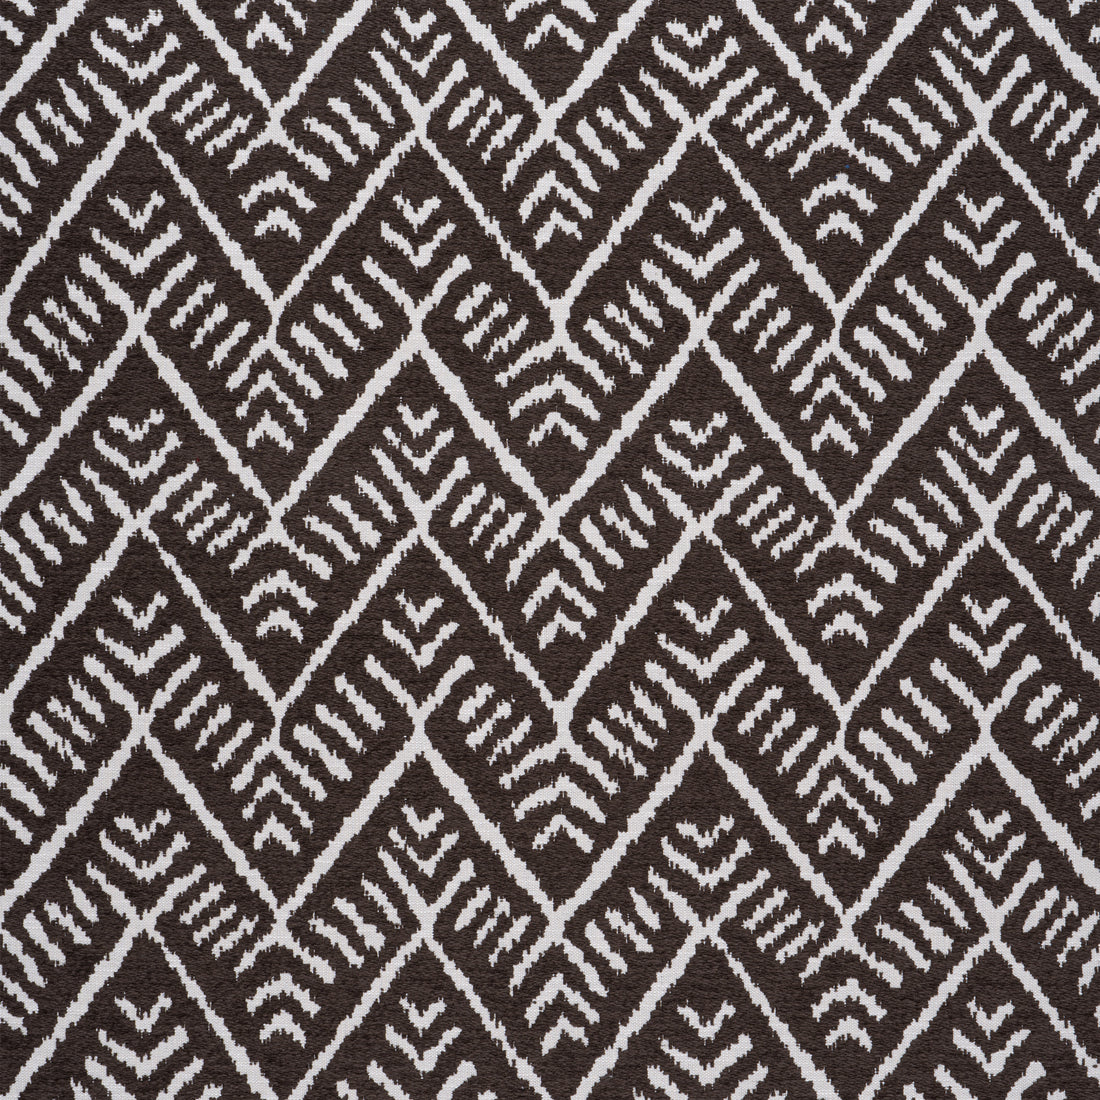 Tahoe fabric in bark color - pattern number W78356 - by Thibaut in the  Sierra collection